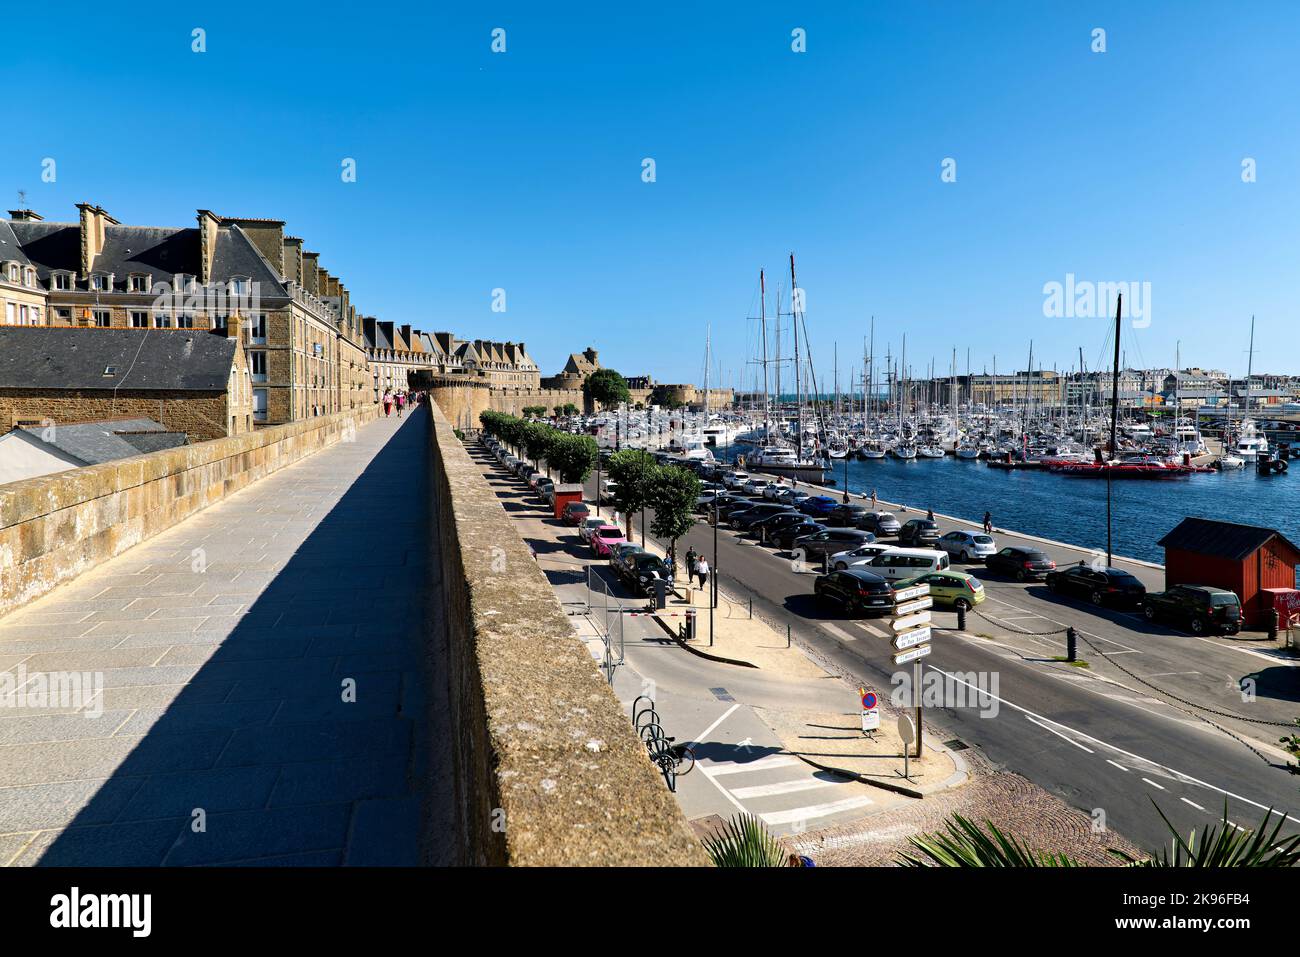 Saint Malo Brittany France. Les remparts. Battlements. Fortified walls Stock Photo